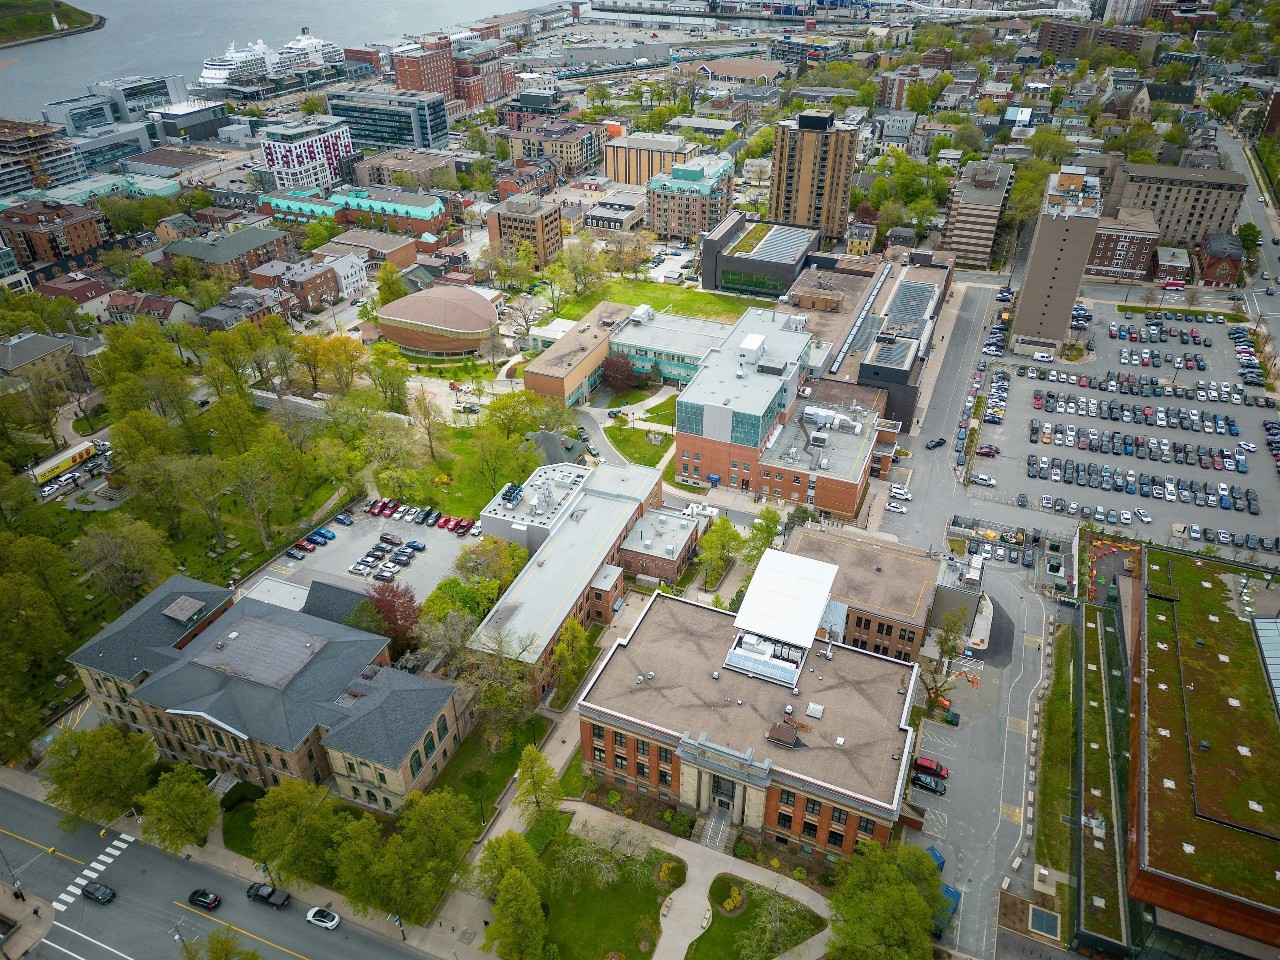 Aerial view of Dalhousie's downtown Sexton Campus with rooftops, green spaces and parking lots.